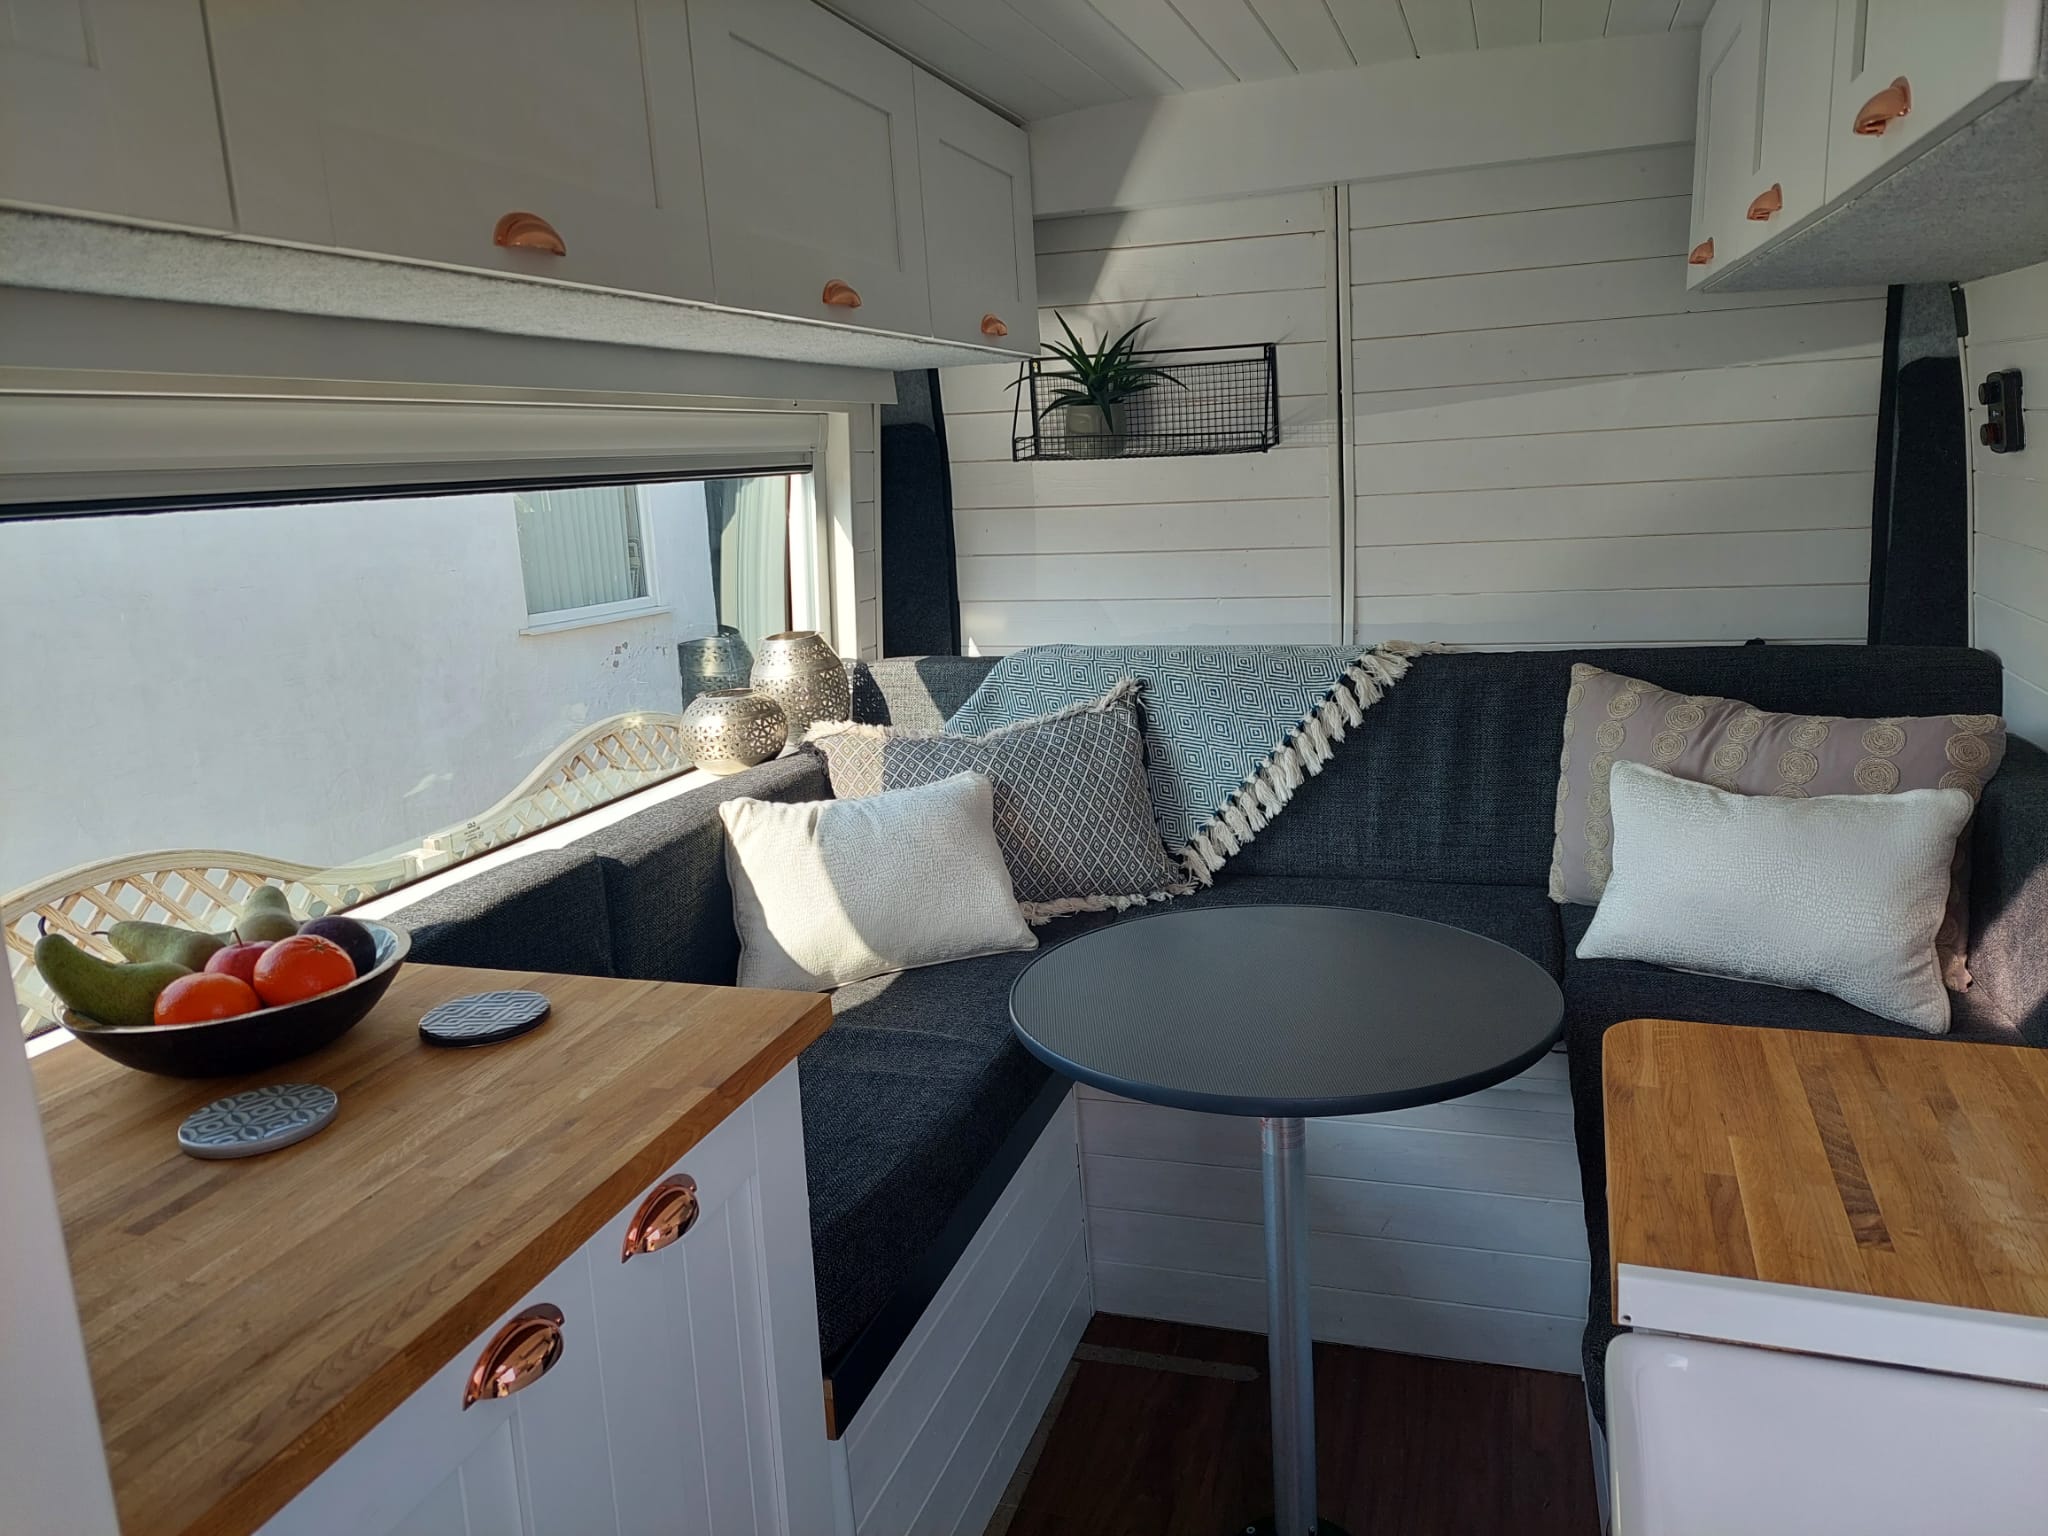 A cozy RV interior with a U-shaped seating area featuring dark cushions and various throw pillows. A small, round black table is centered in front of the seating. Adjacent to the seating is a wooden counter. A large window lets in natural light, illuminating the space.